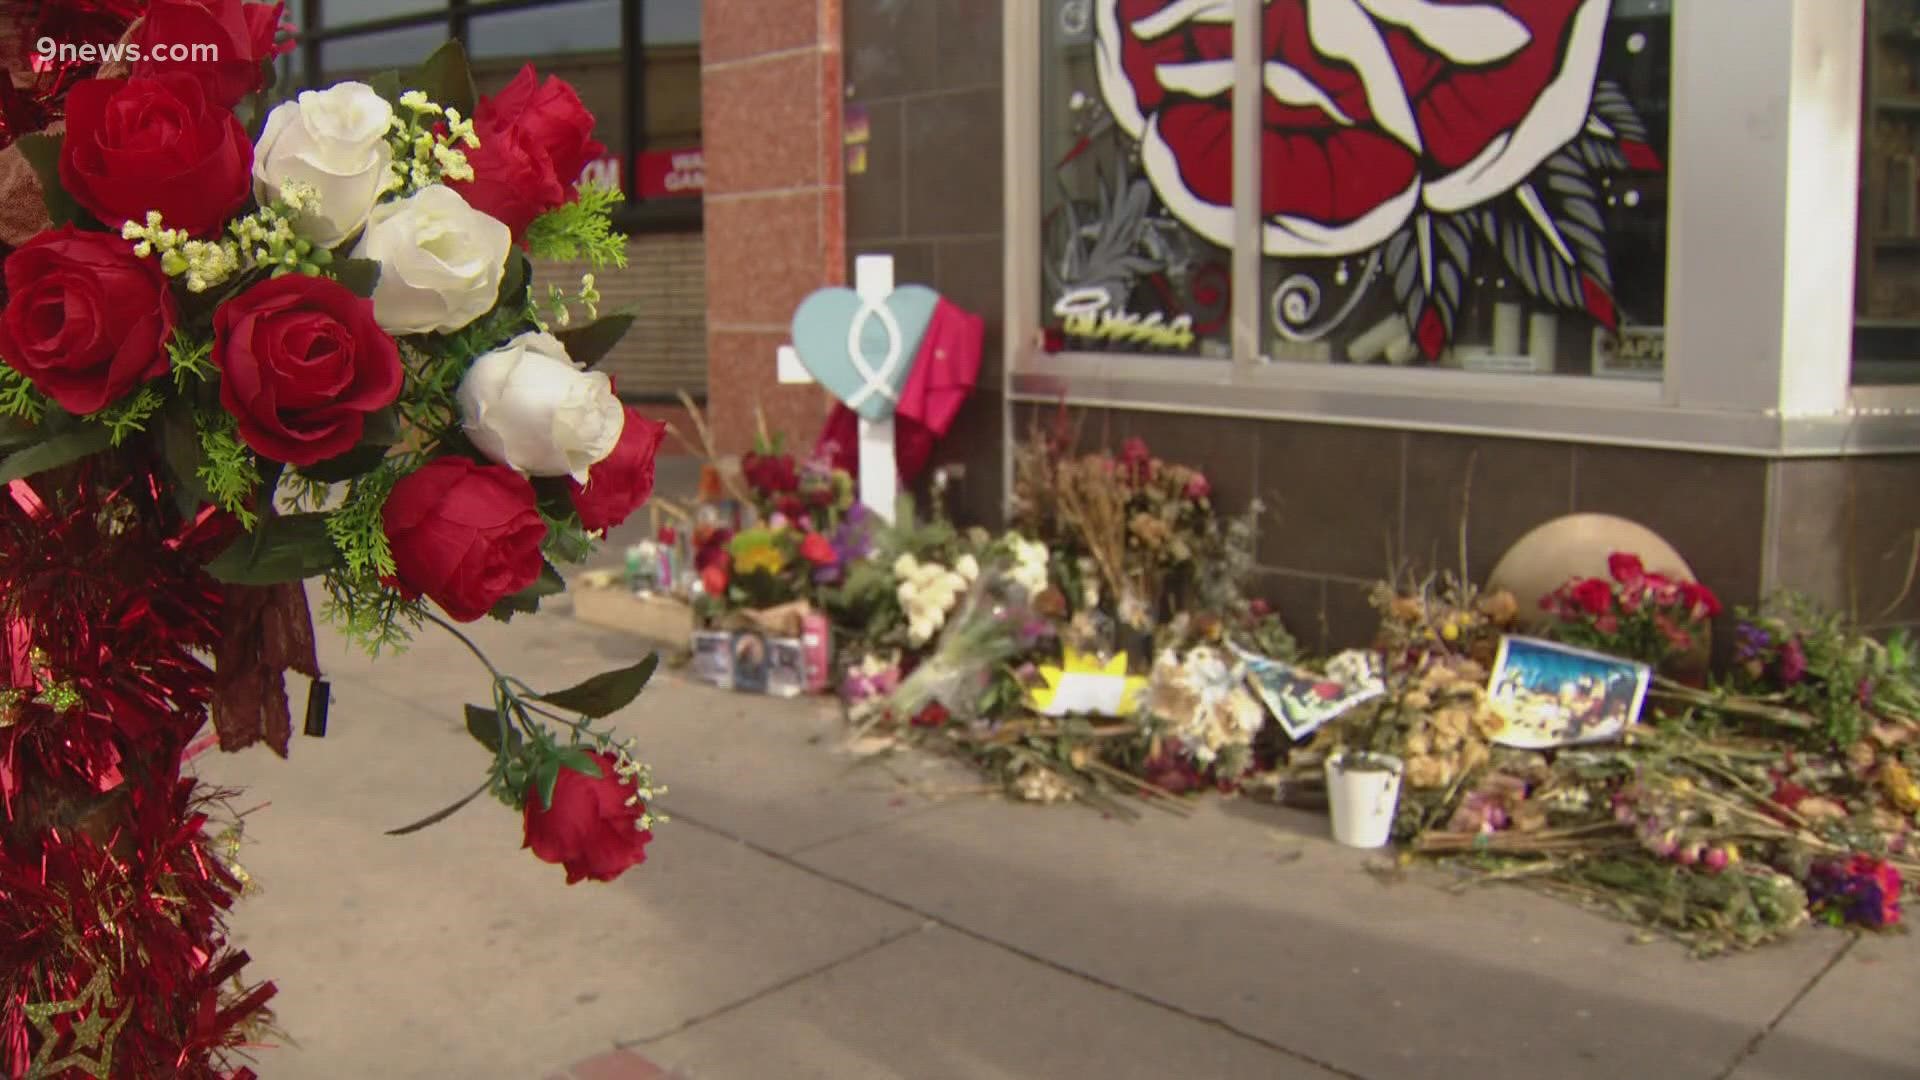 A community is still hurting - nearly three weeks after a gunman killed five people and injured two others.